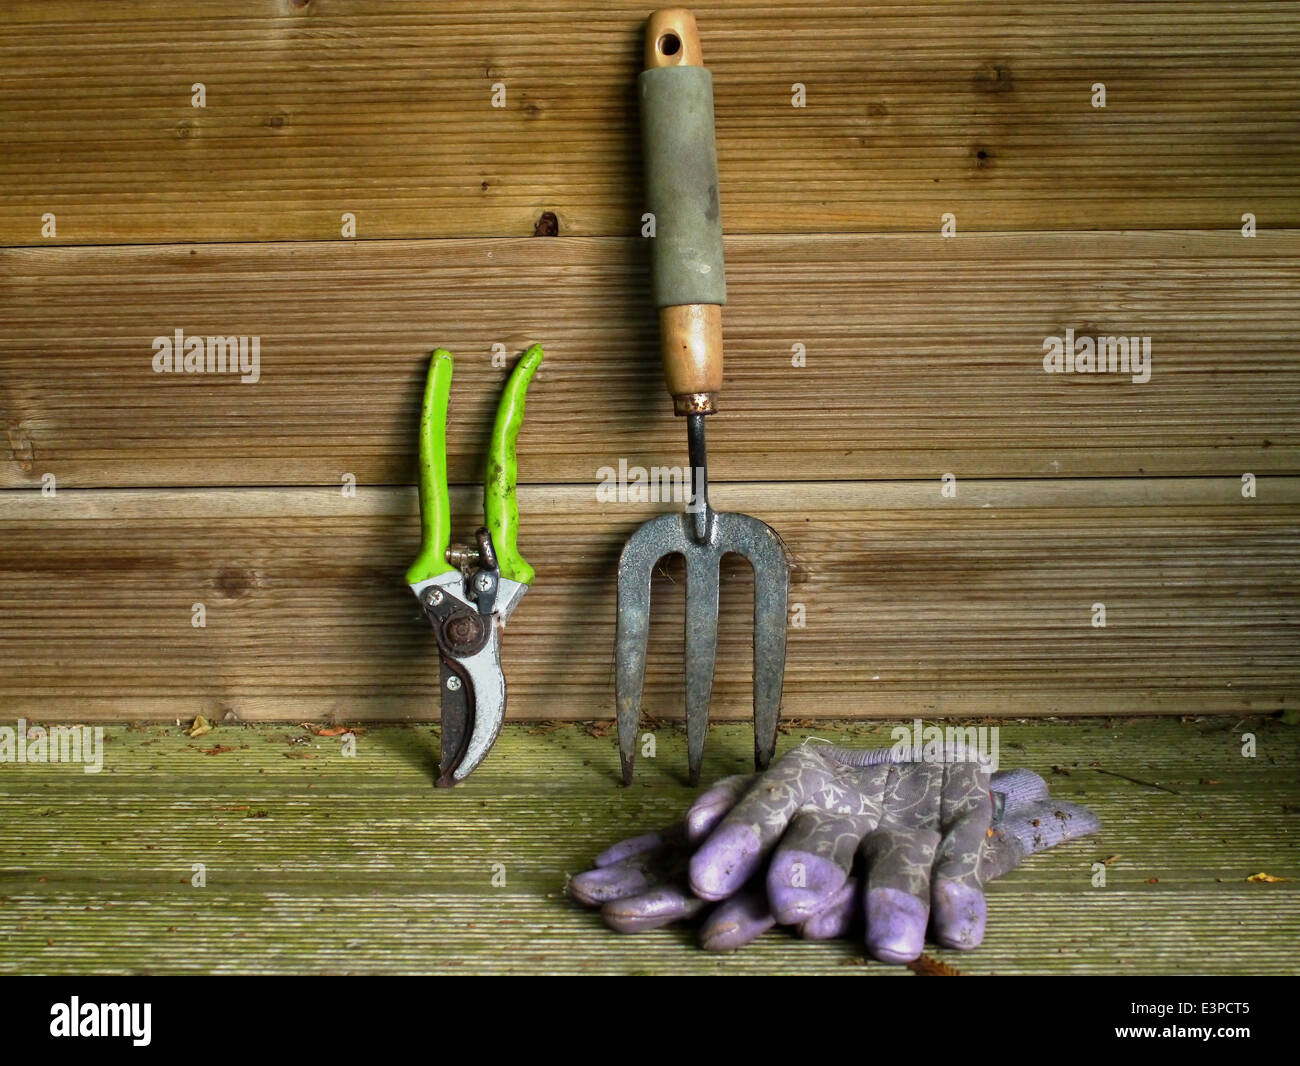 Garden seat with tools and gloves Stock Photo